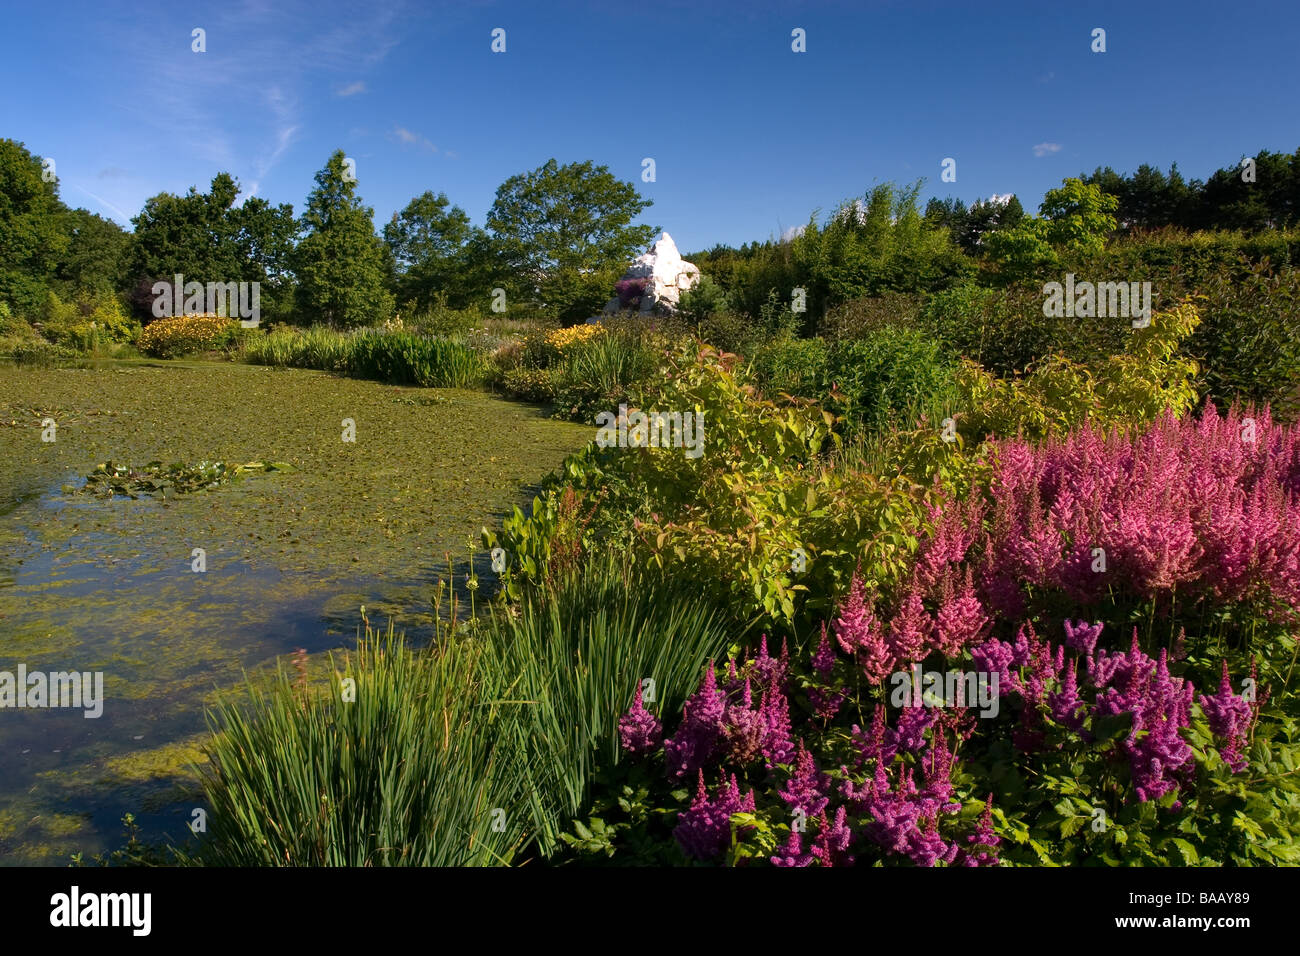 Il Royal Horticultural Society Garden Harlow Carr in estate Foto Stock